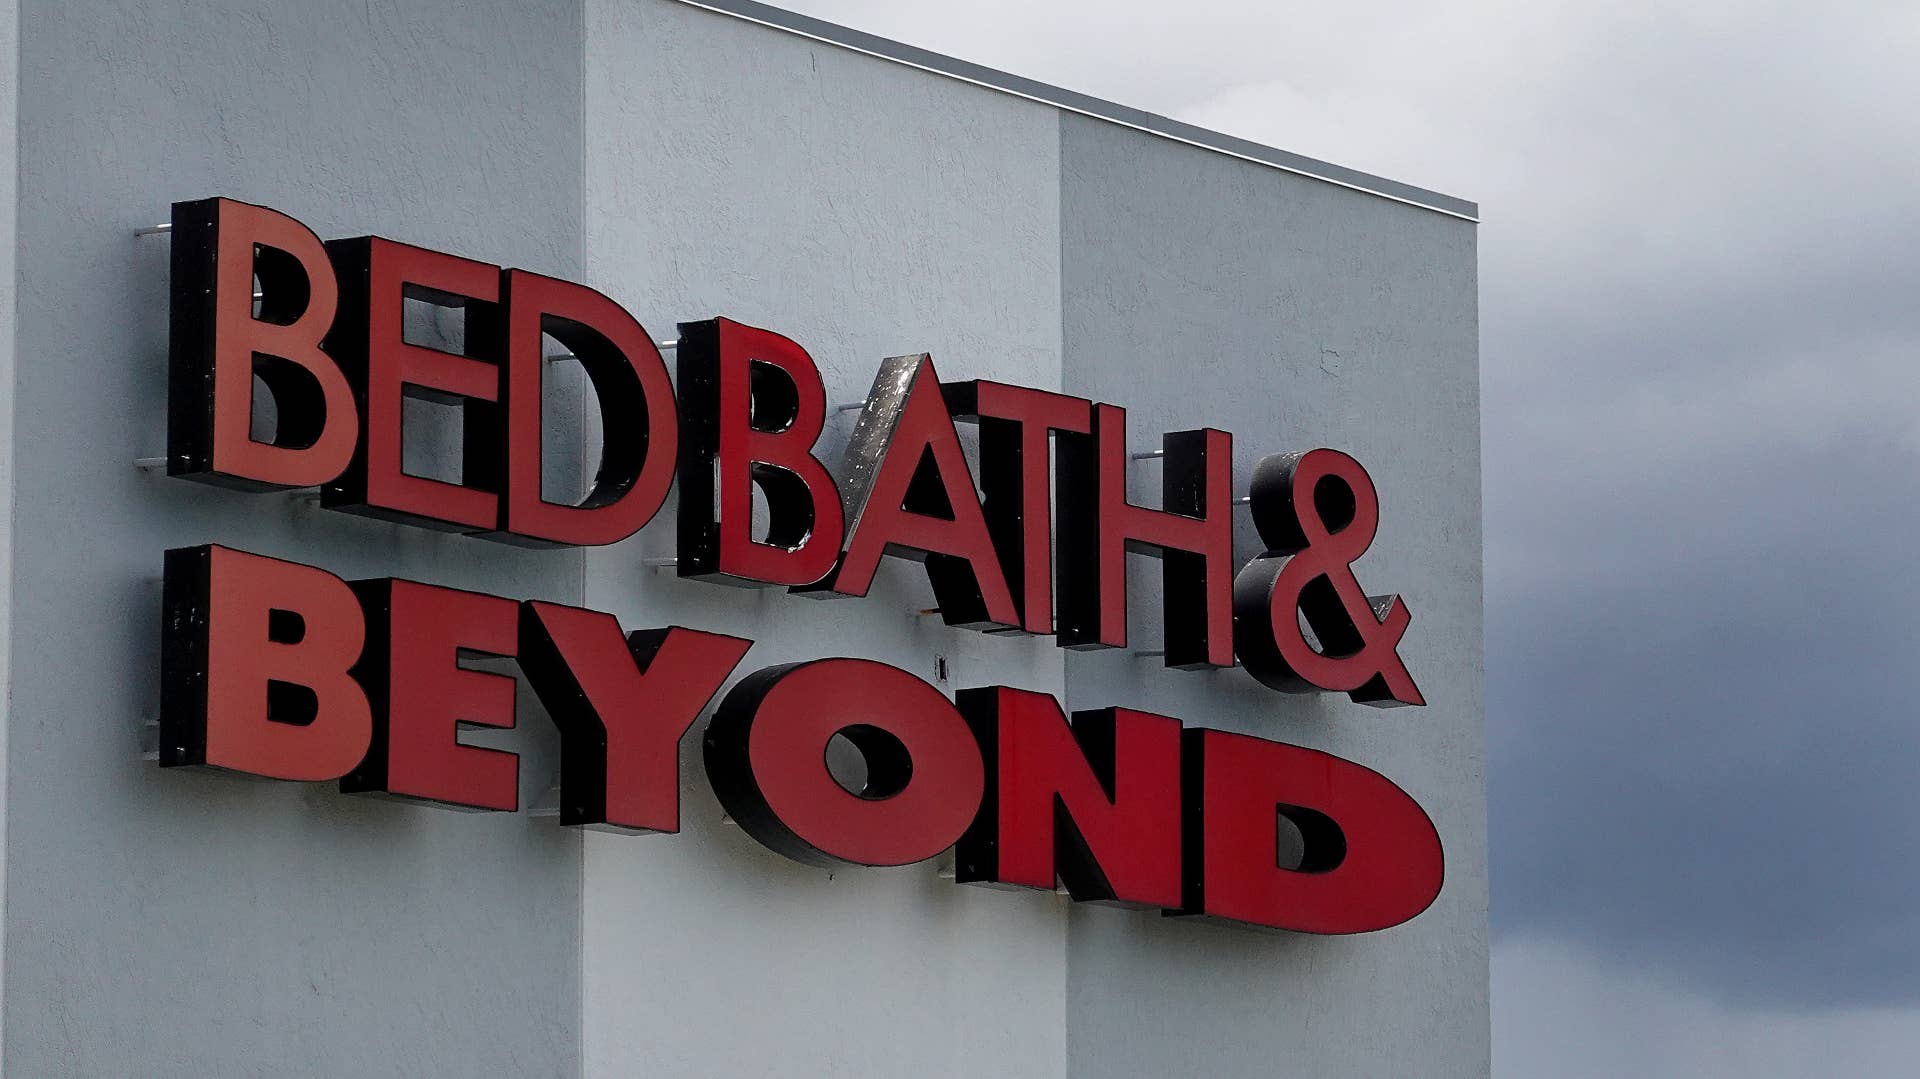 A Bed Bath & Beyond sign hangs outside the store in Miami, Florida.